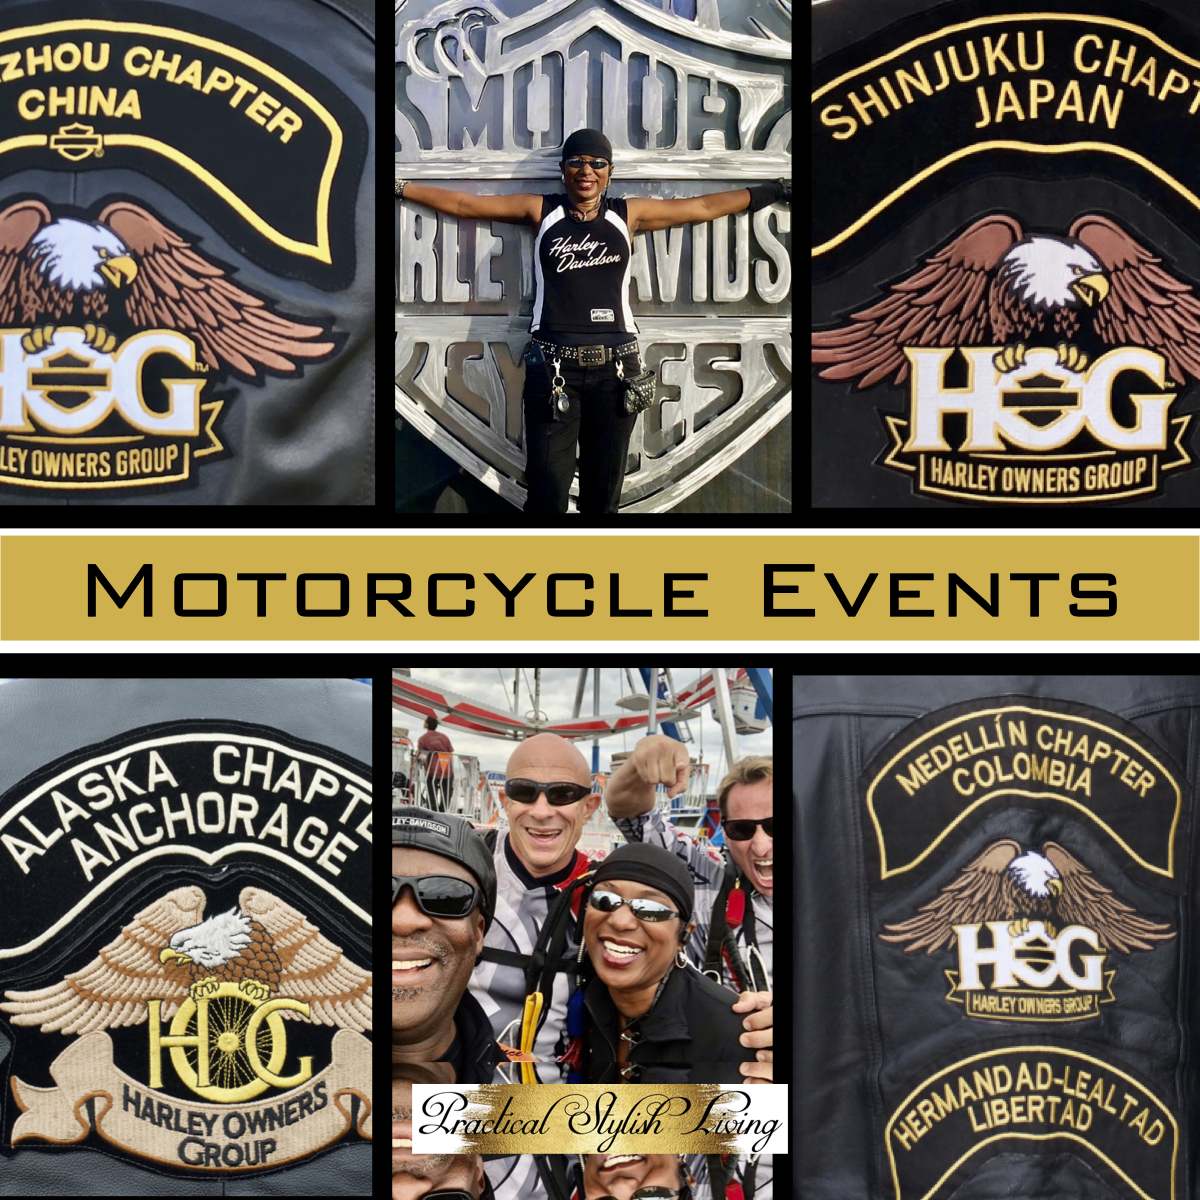 Motorcycle Events | Practical Stylish Living | Motorcycle Lifestyle